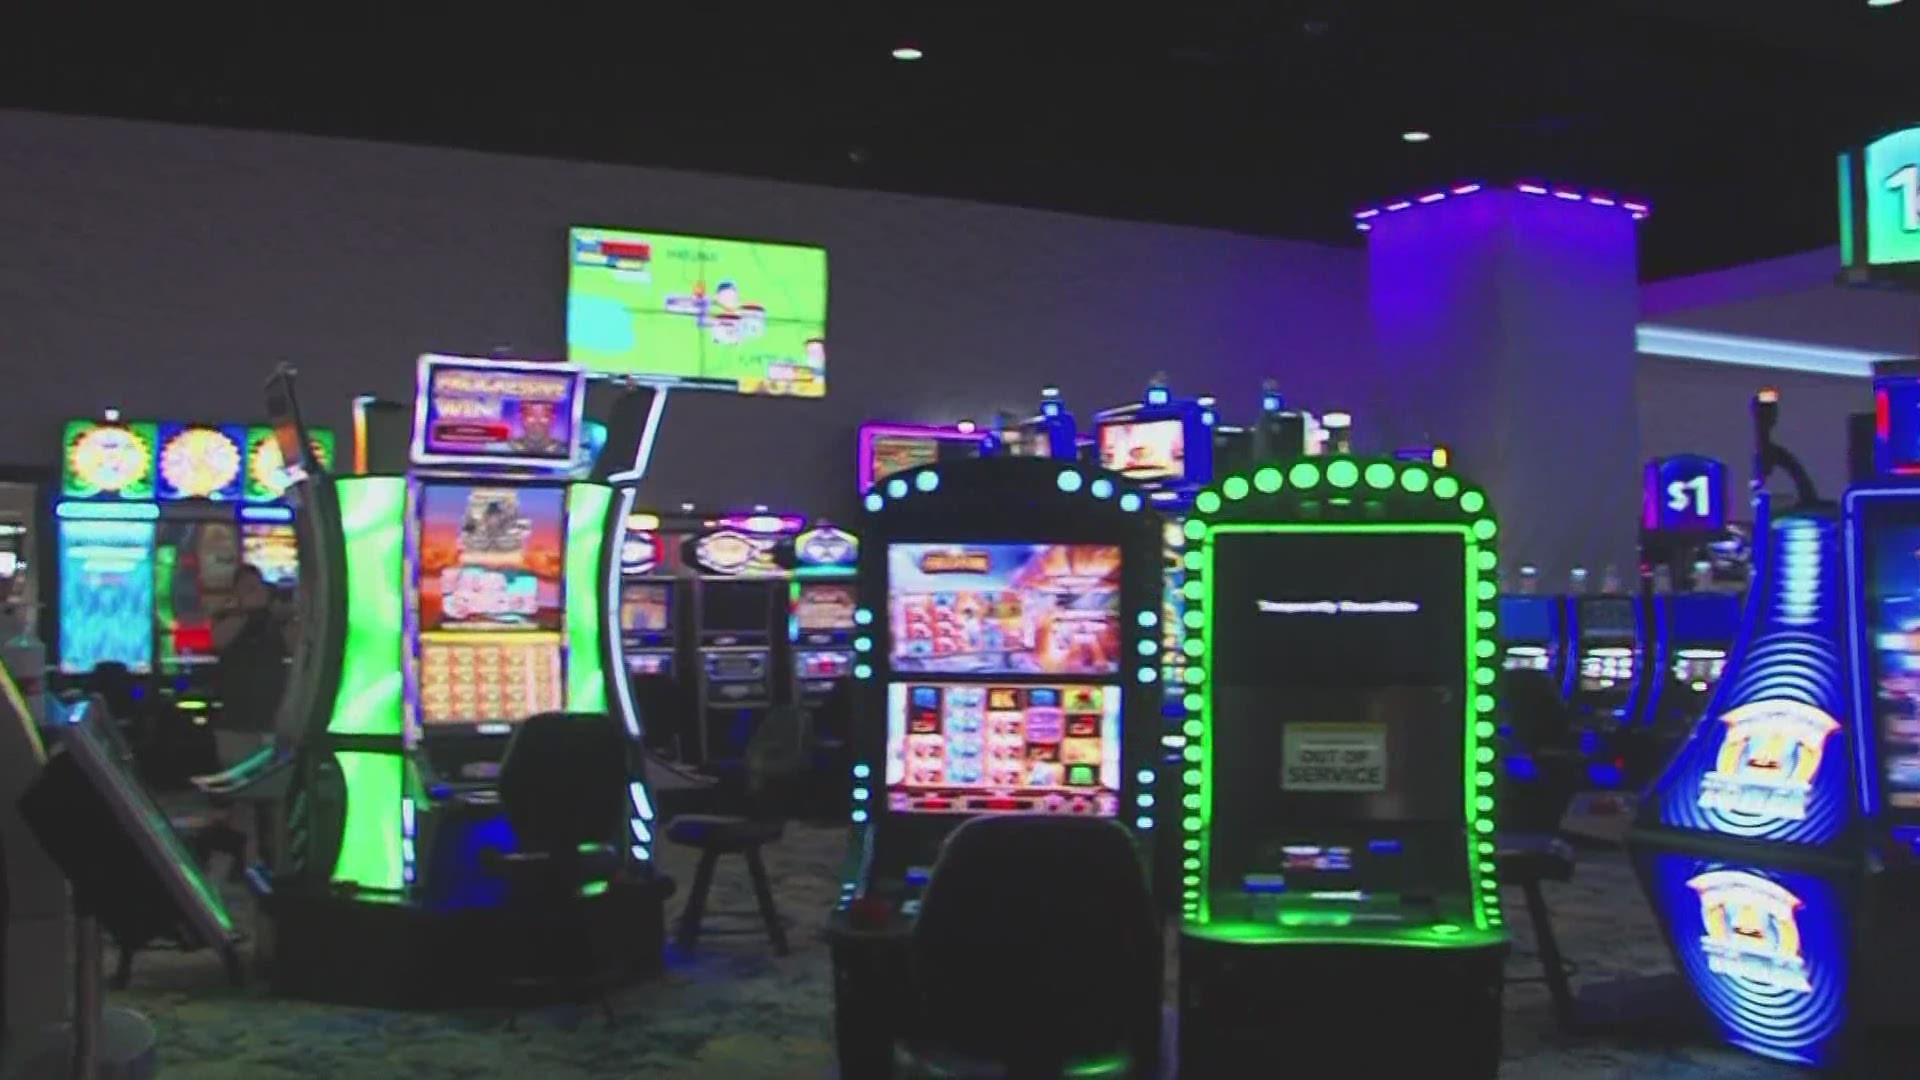 After a three-month hiatus, the Altoona casino is ensuring proper social distancing.